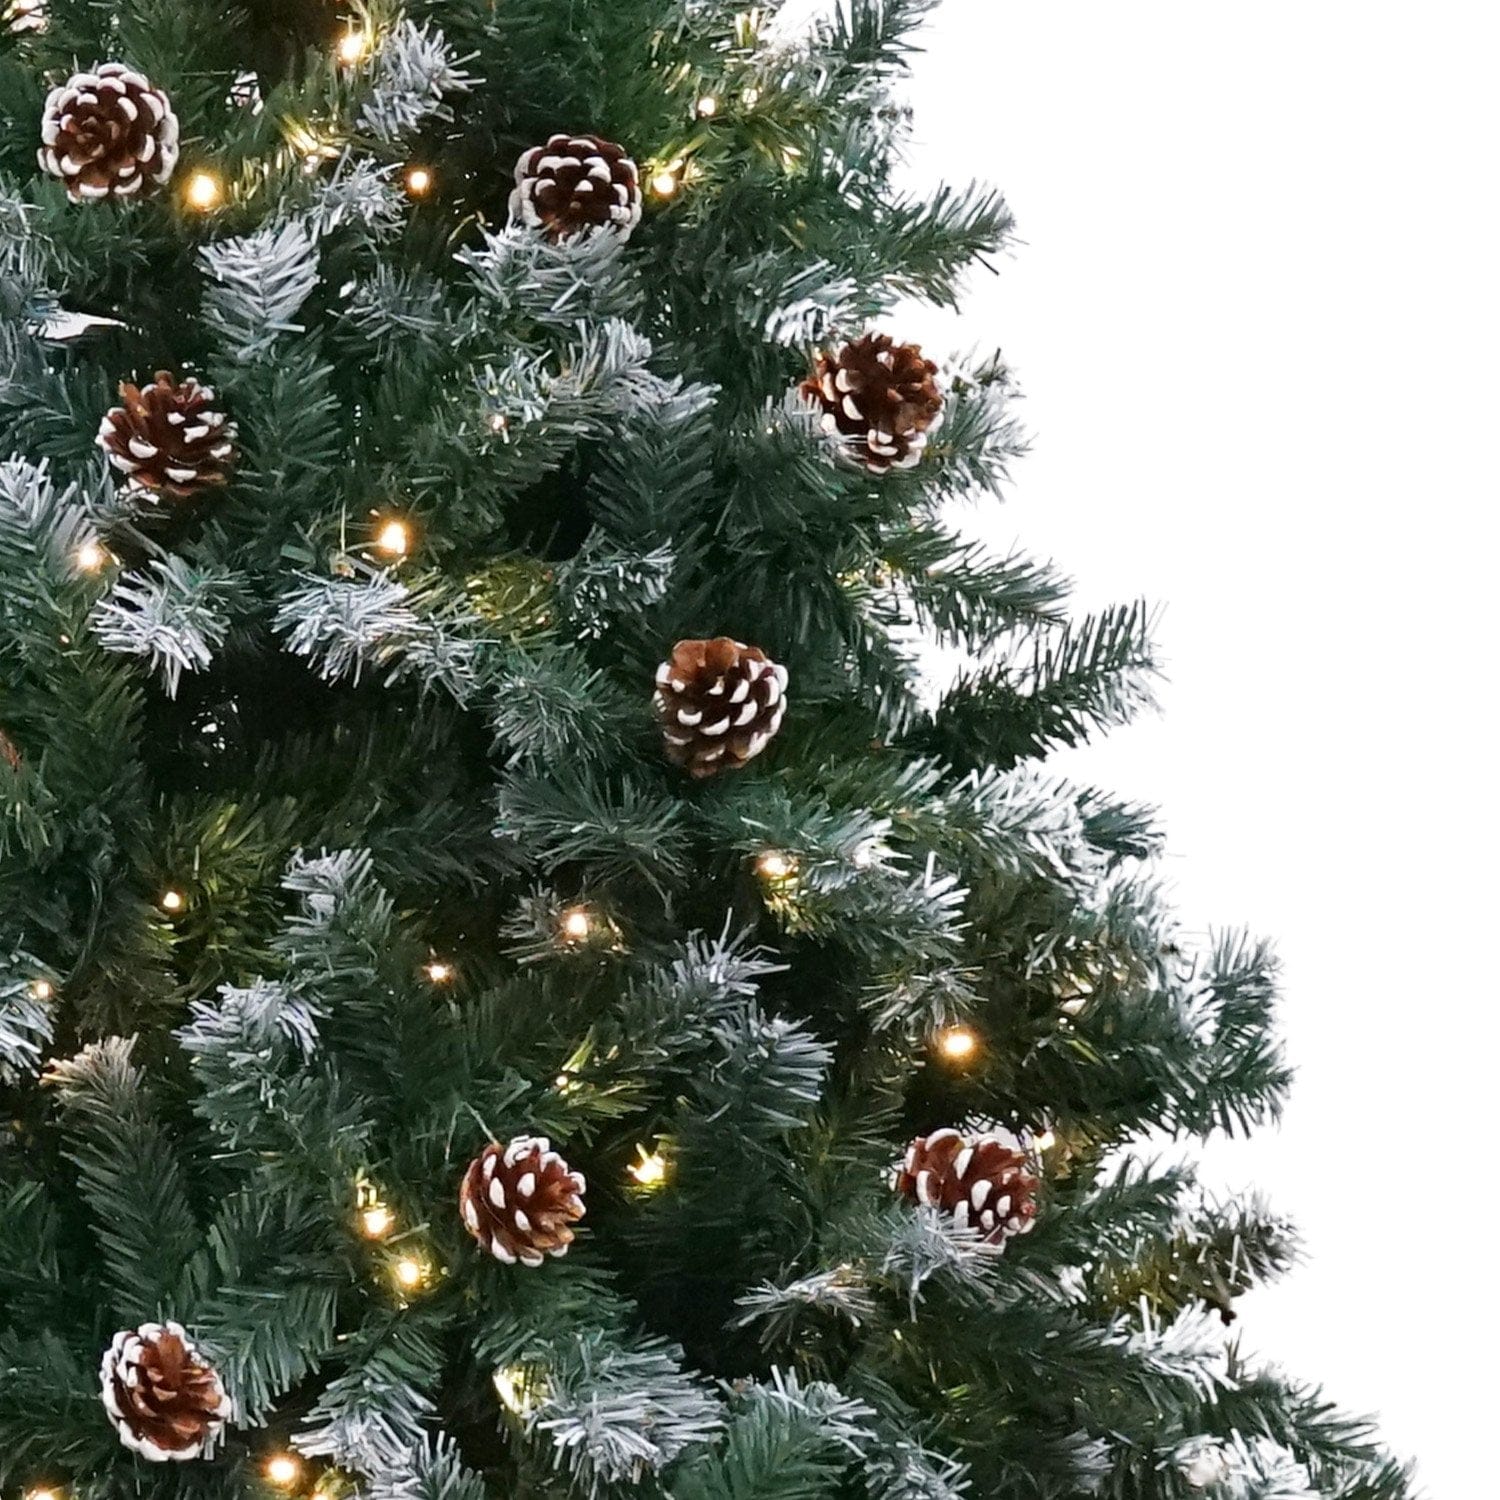 1.8m Pre Lit LED Christmas Tree with Pine Cones